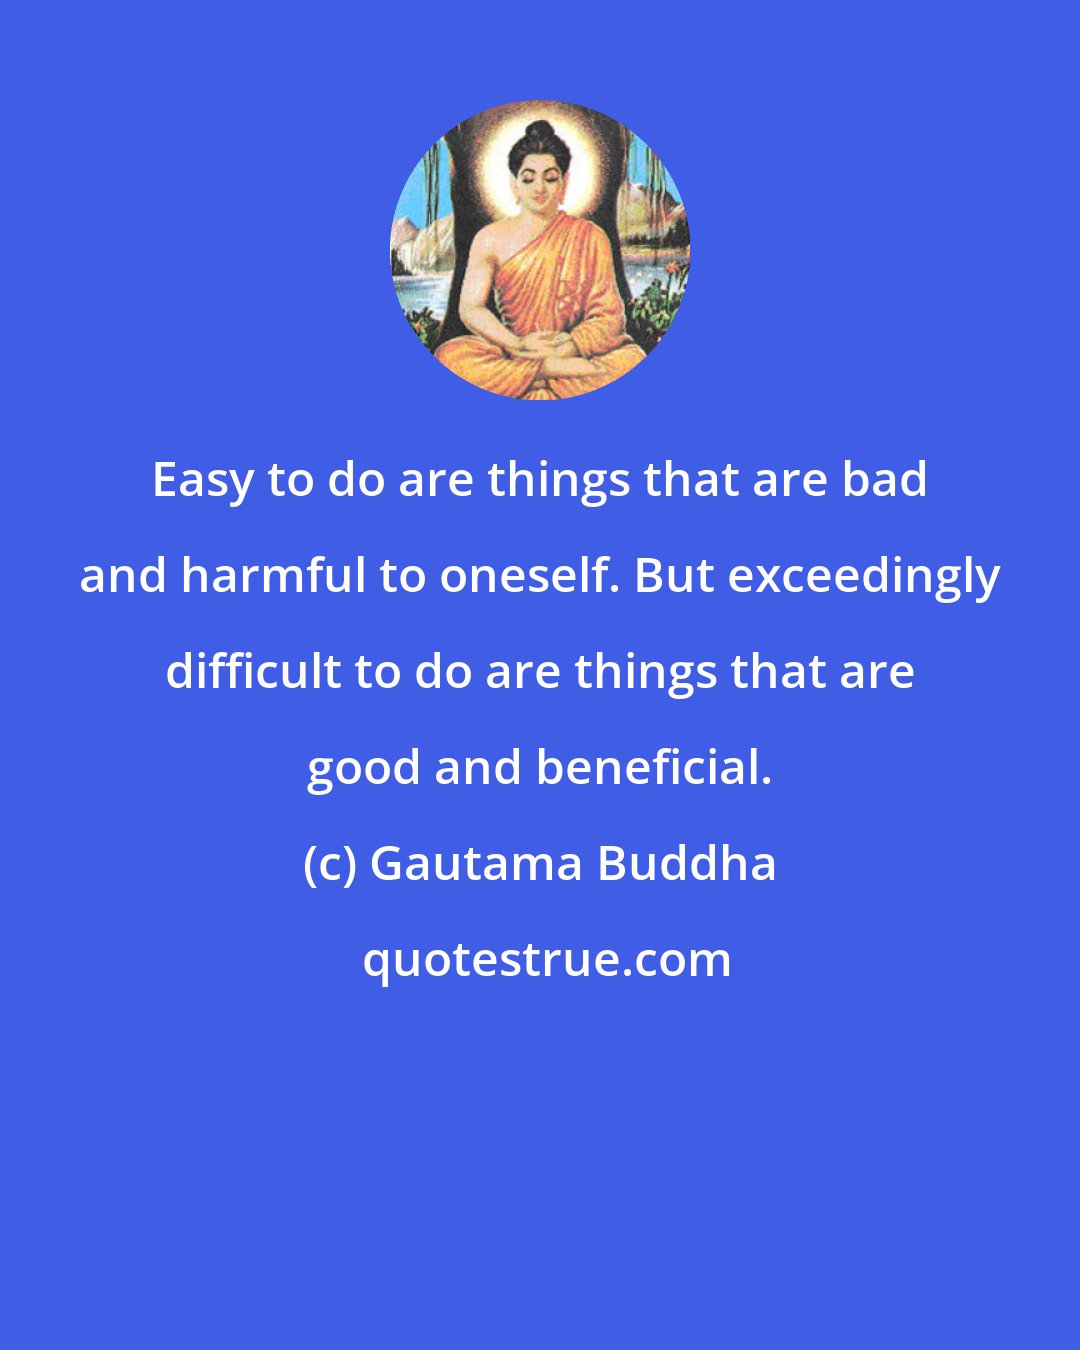 Gautama Buddha: Easy to do are things that are bad and harmful to oneself. But exceedingly difficult to do are things that are good and beneficial.